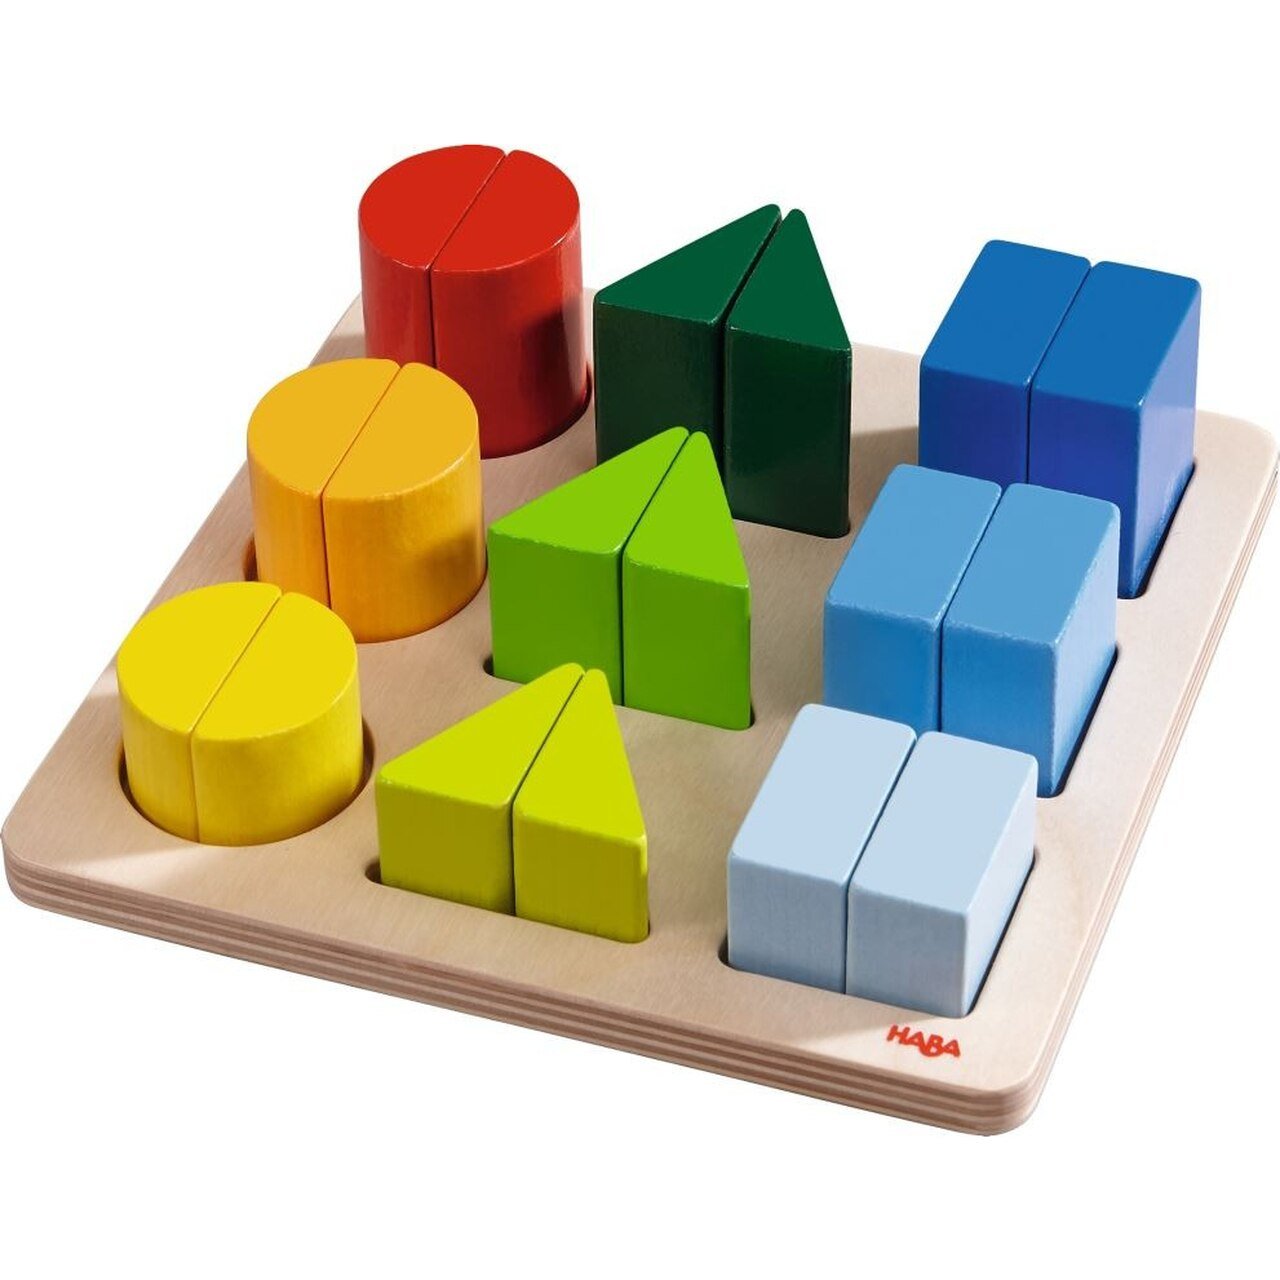 HABA Perfect Pairs - Wood Wood Toys Canada's Favourite Montessori Toy Store